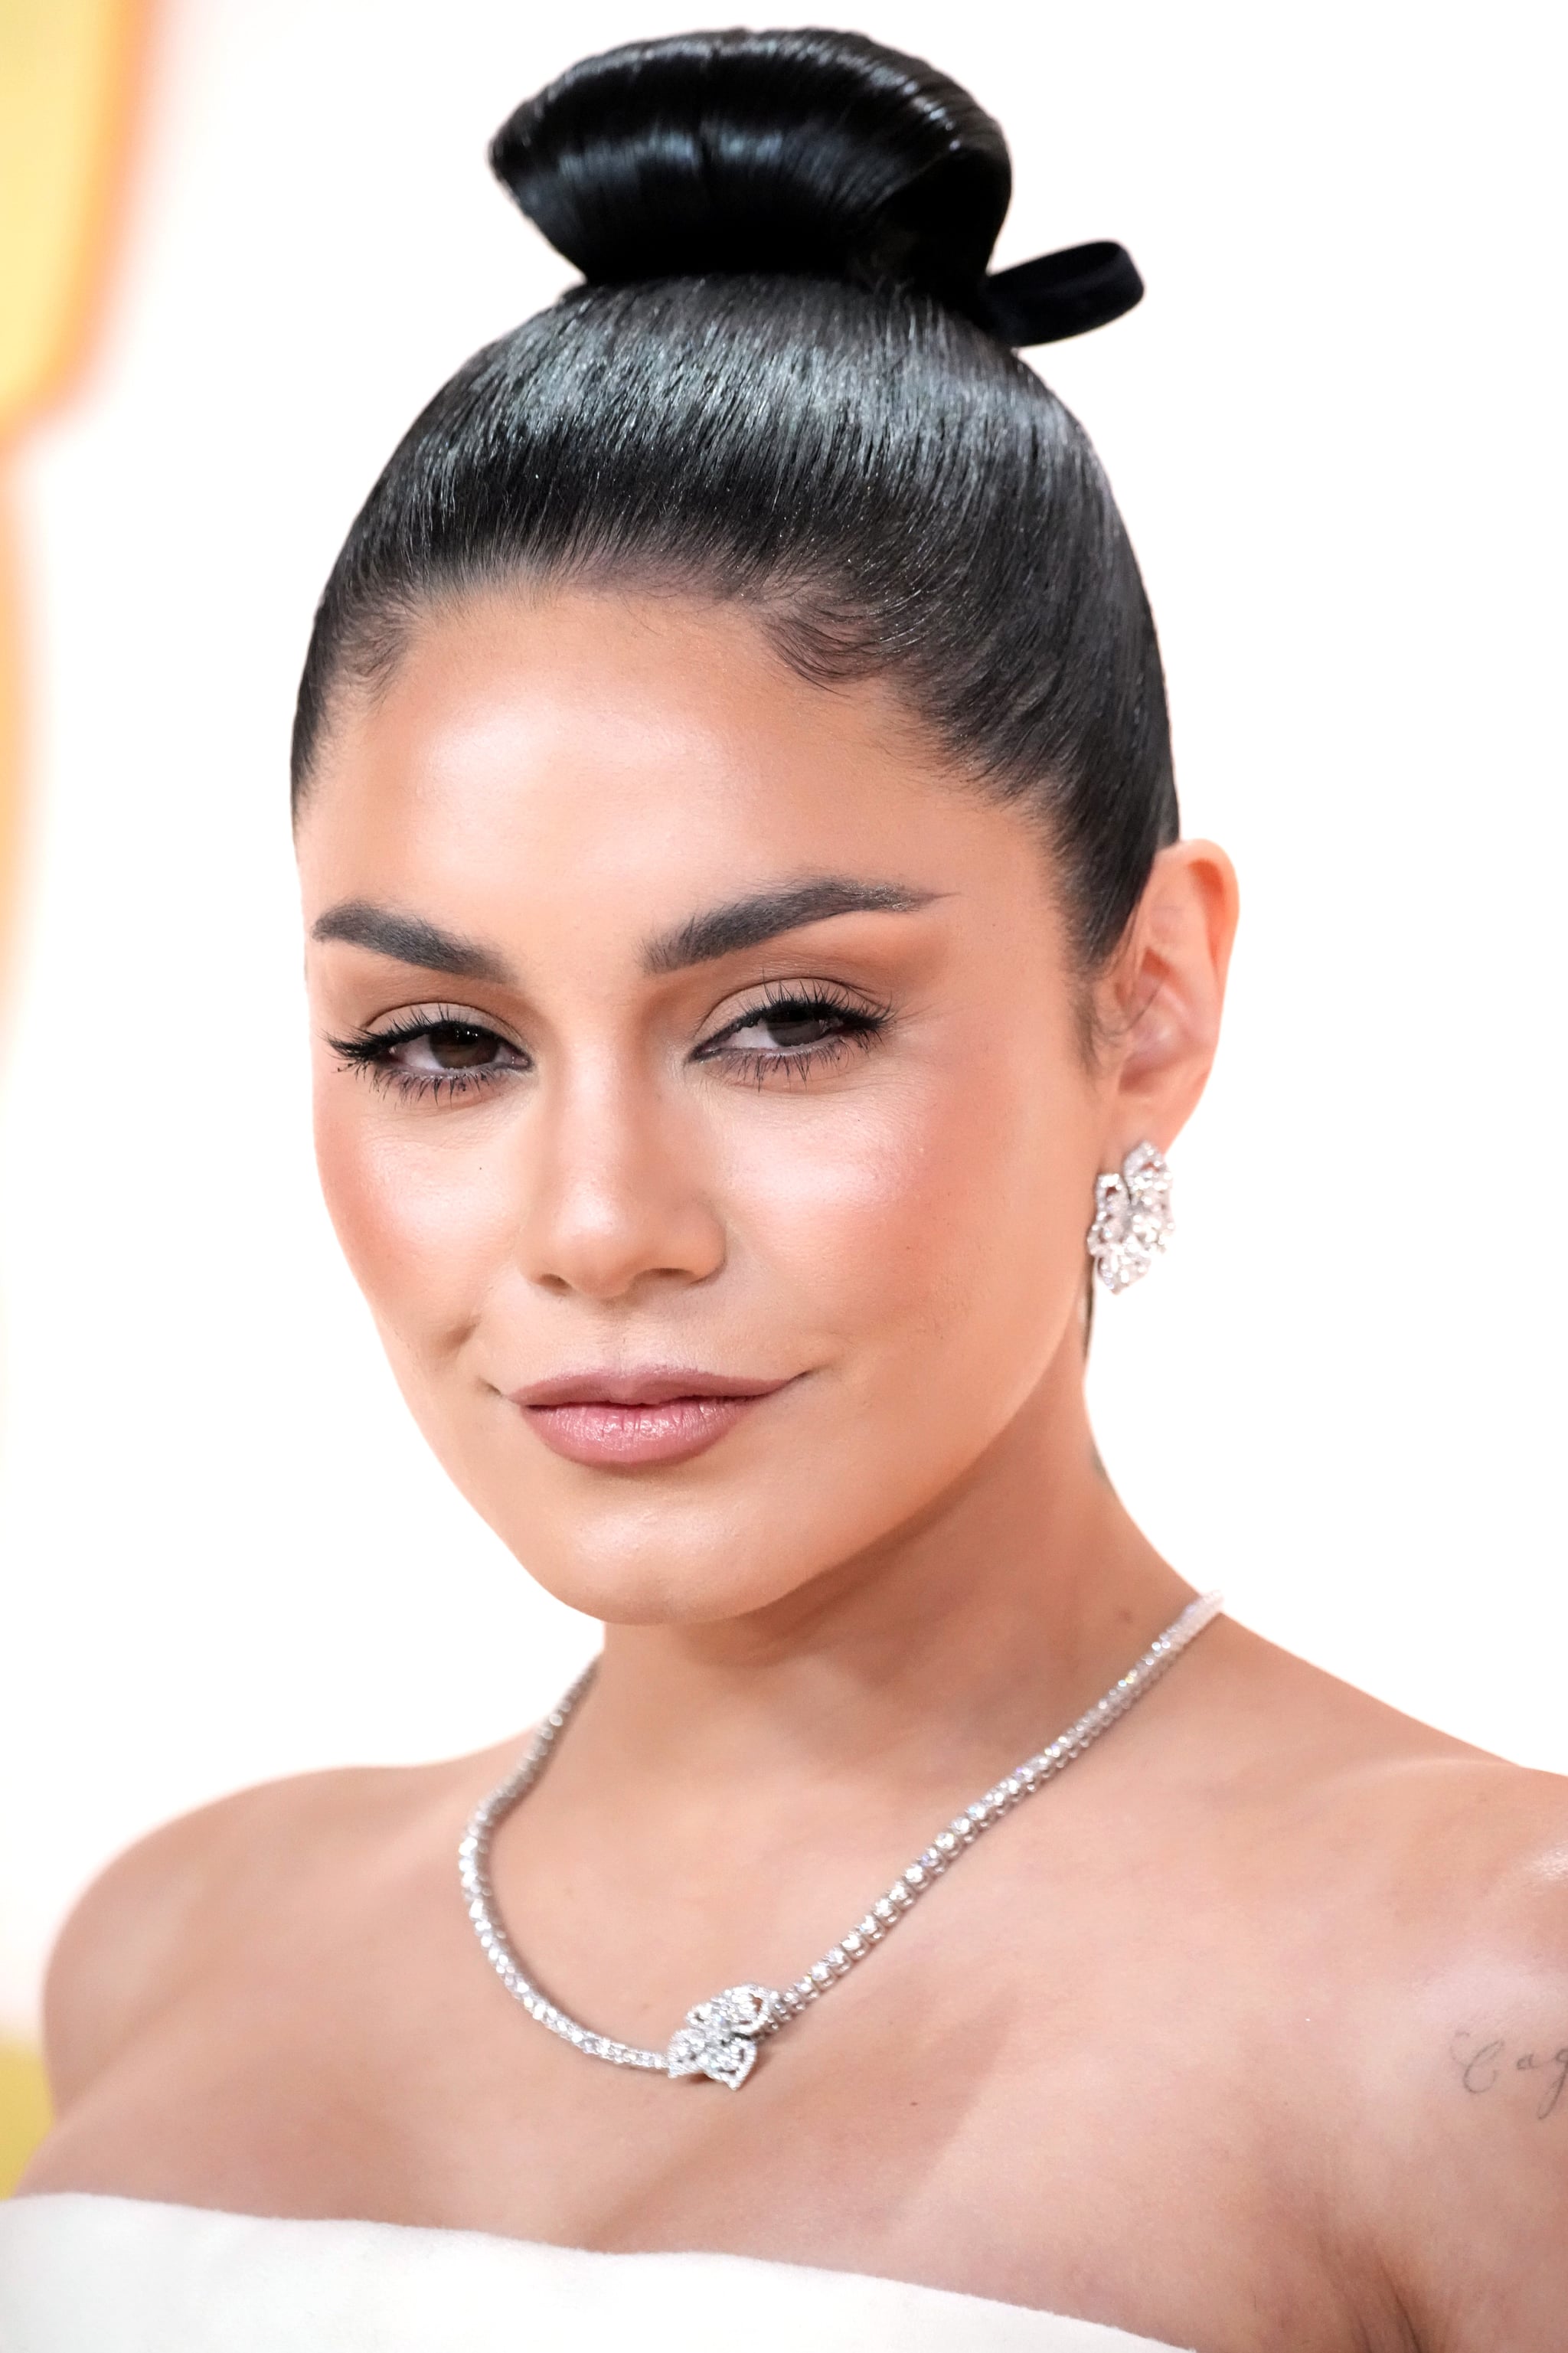 HOLLYWOOD, CALIFORNIA - MARCH 12: Vanessa Hudgens attends the 95th Annual Academy Awards on March 12, 2023 in Hollywood, California. (Photo by Jeff Kravitz/FilmMagic)